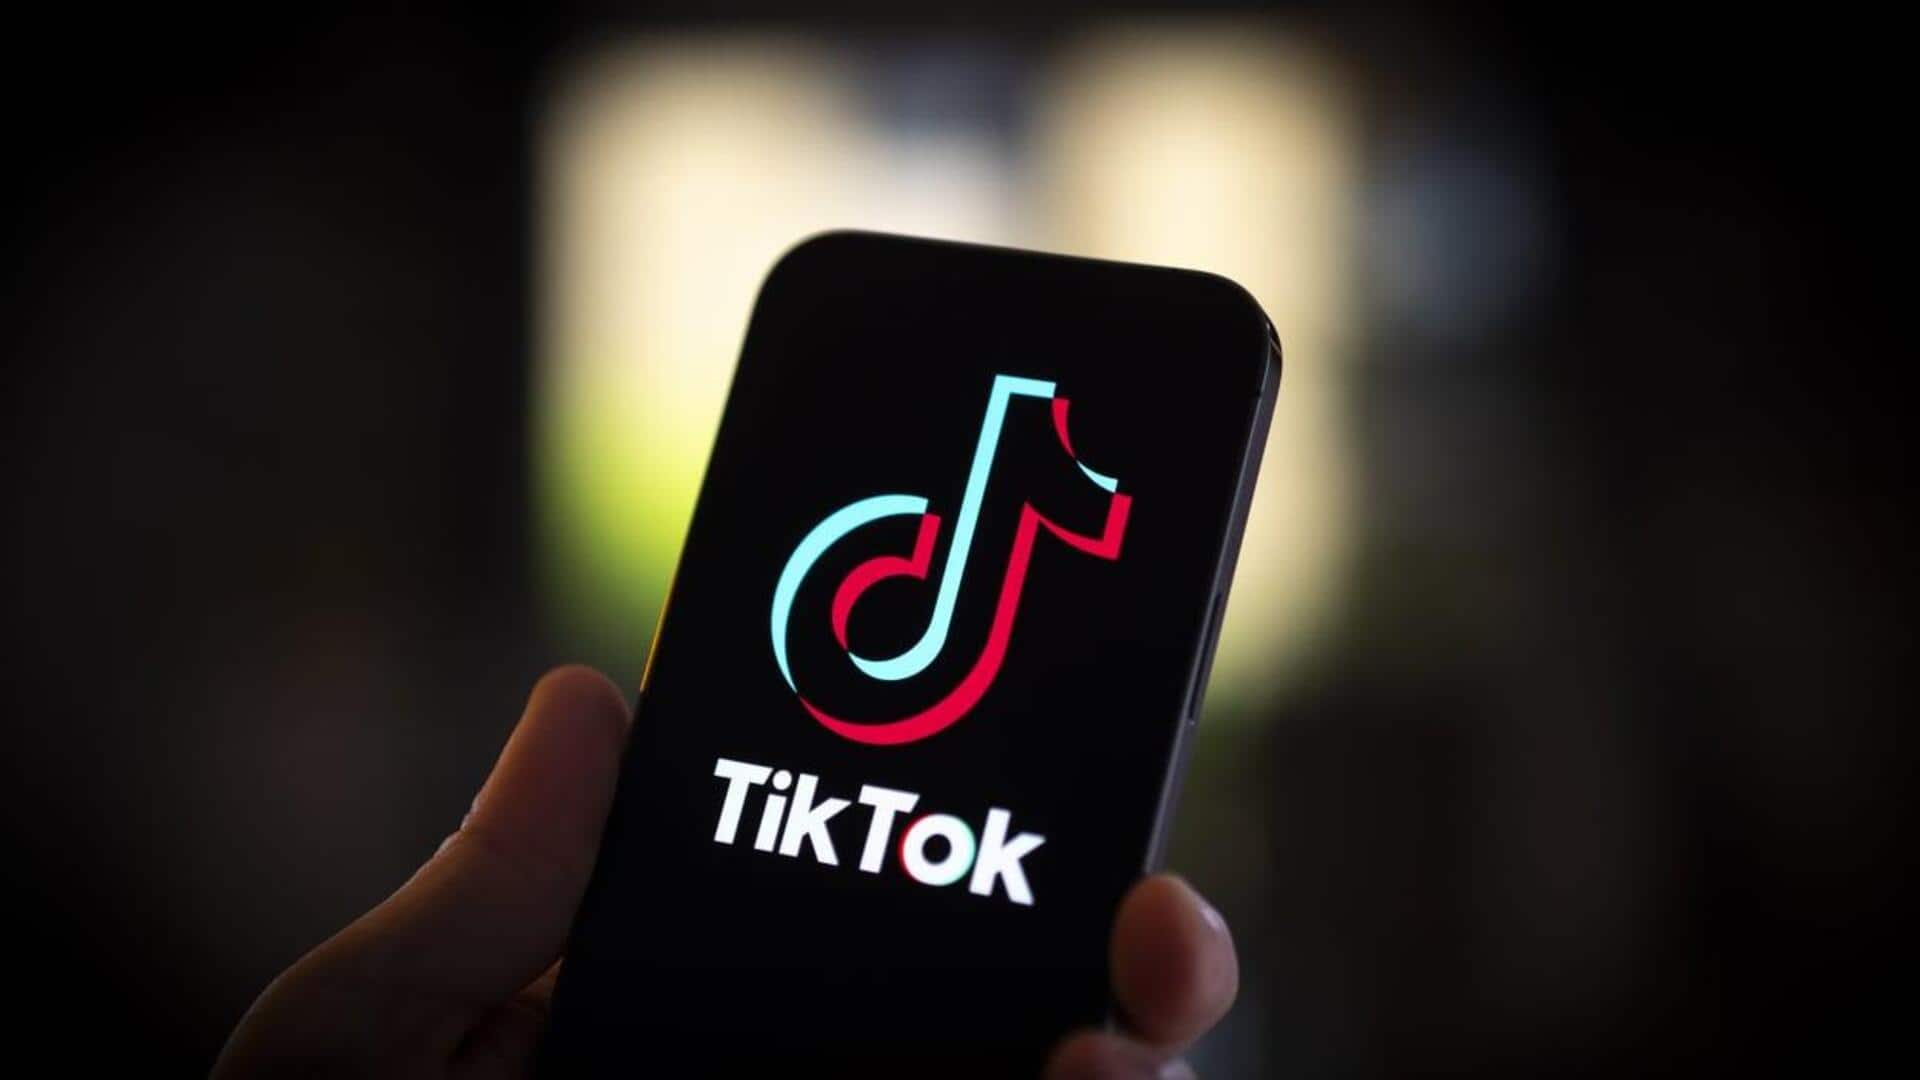 TikTok's new facility could make every video shoppable: Here's how